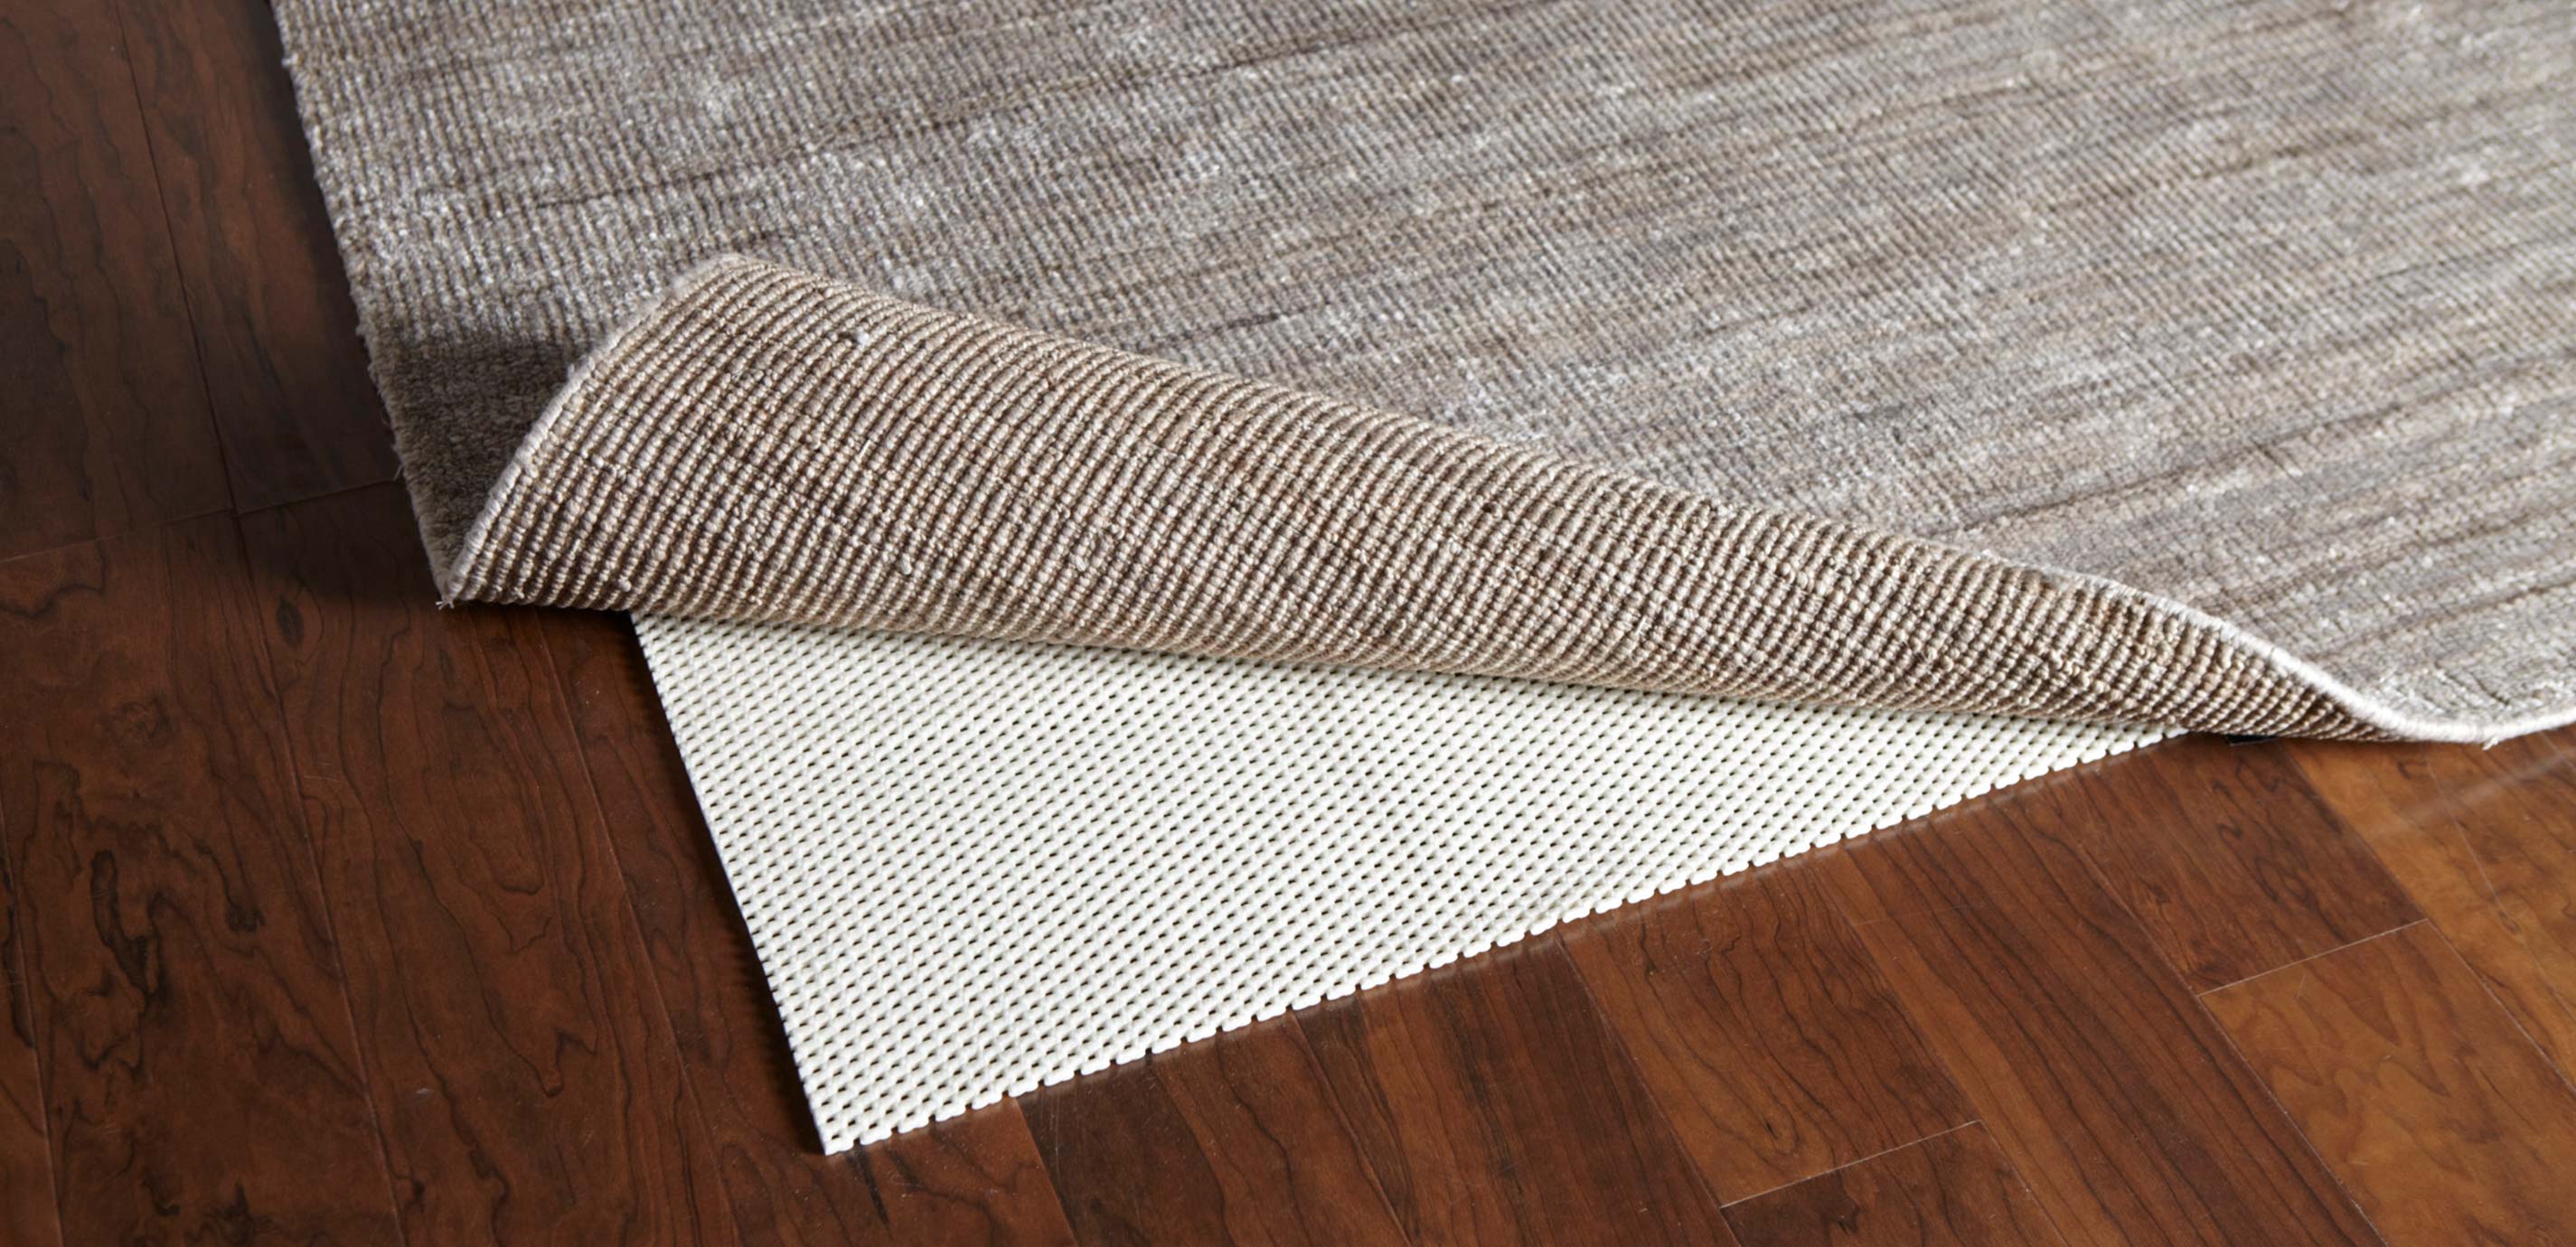 Rug Pads for Laminate Floors